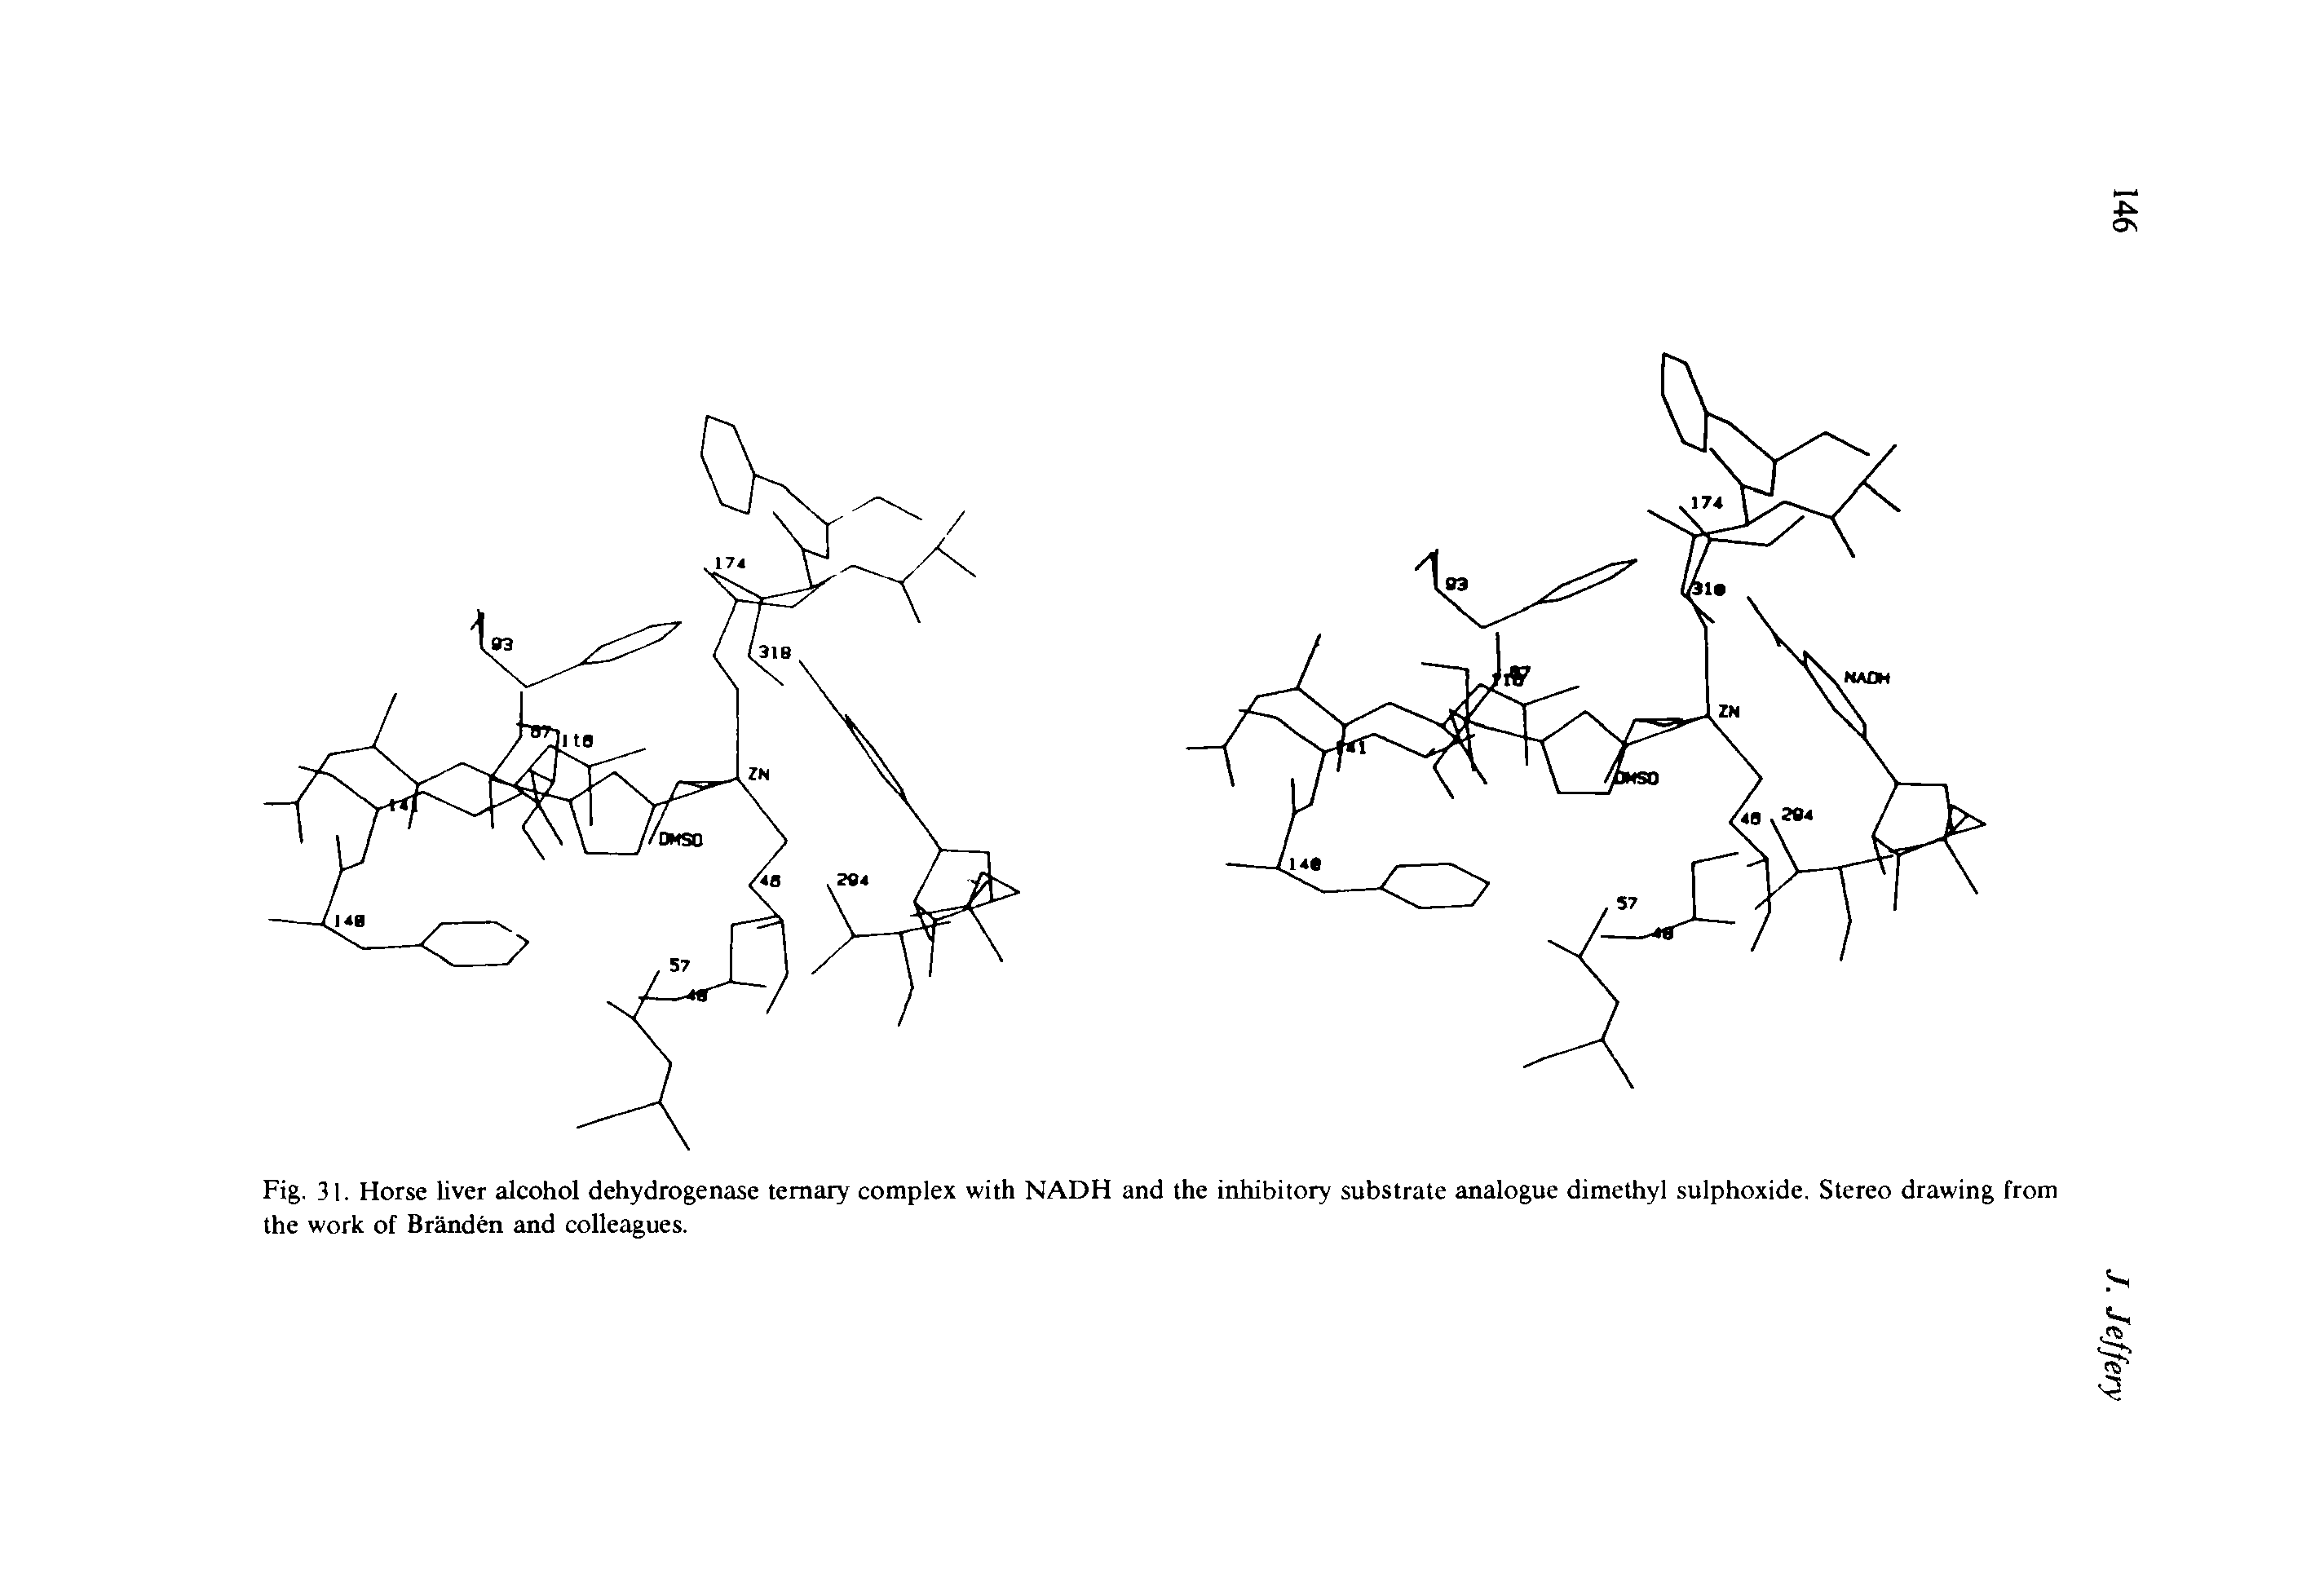 Fig. 31. Horse liver alcohol dehydrogenase ternary complex with NADH and the inhibitory substrate analogue dimethyl sulphoxide. Stereo drawing from the work of Branden and colleagues.